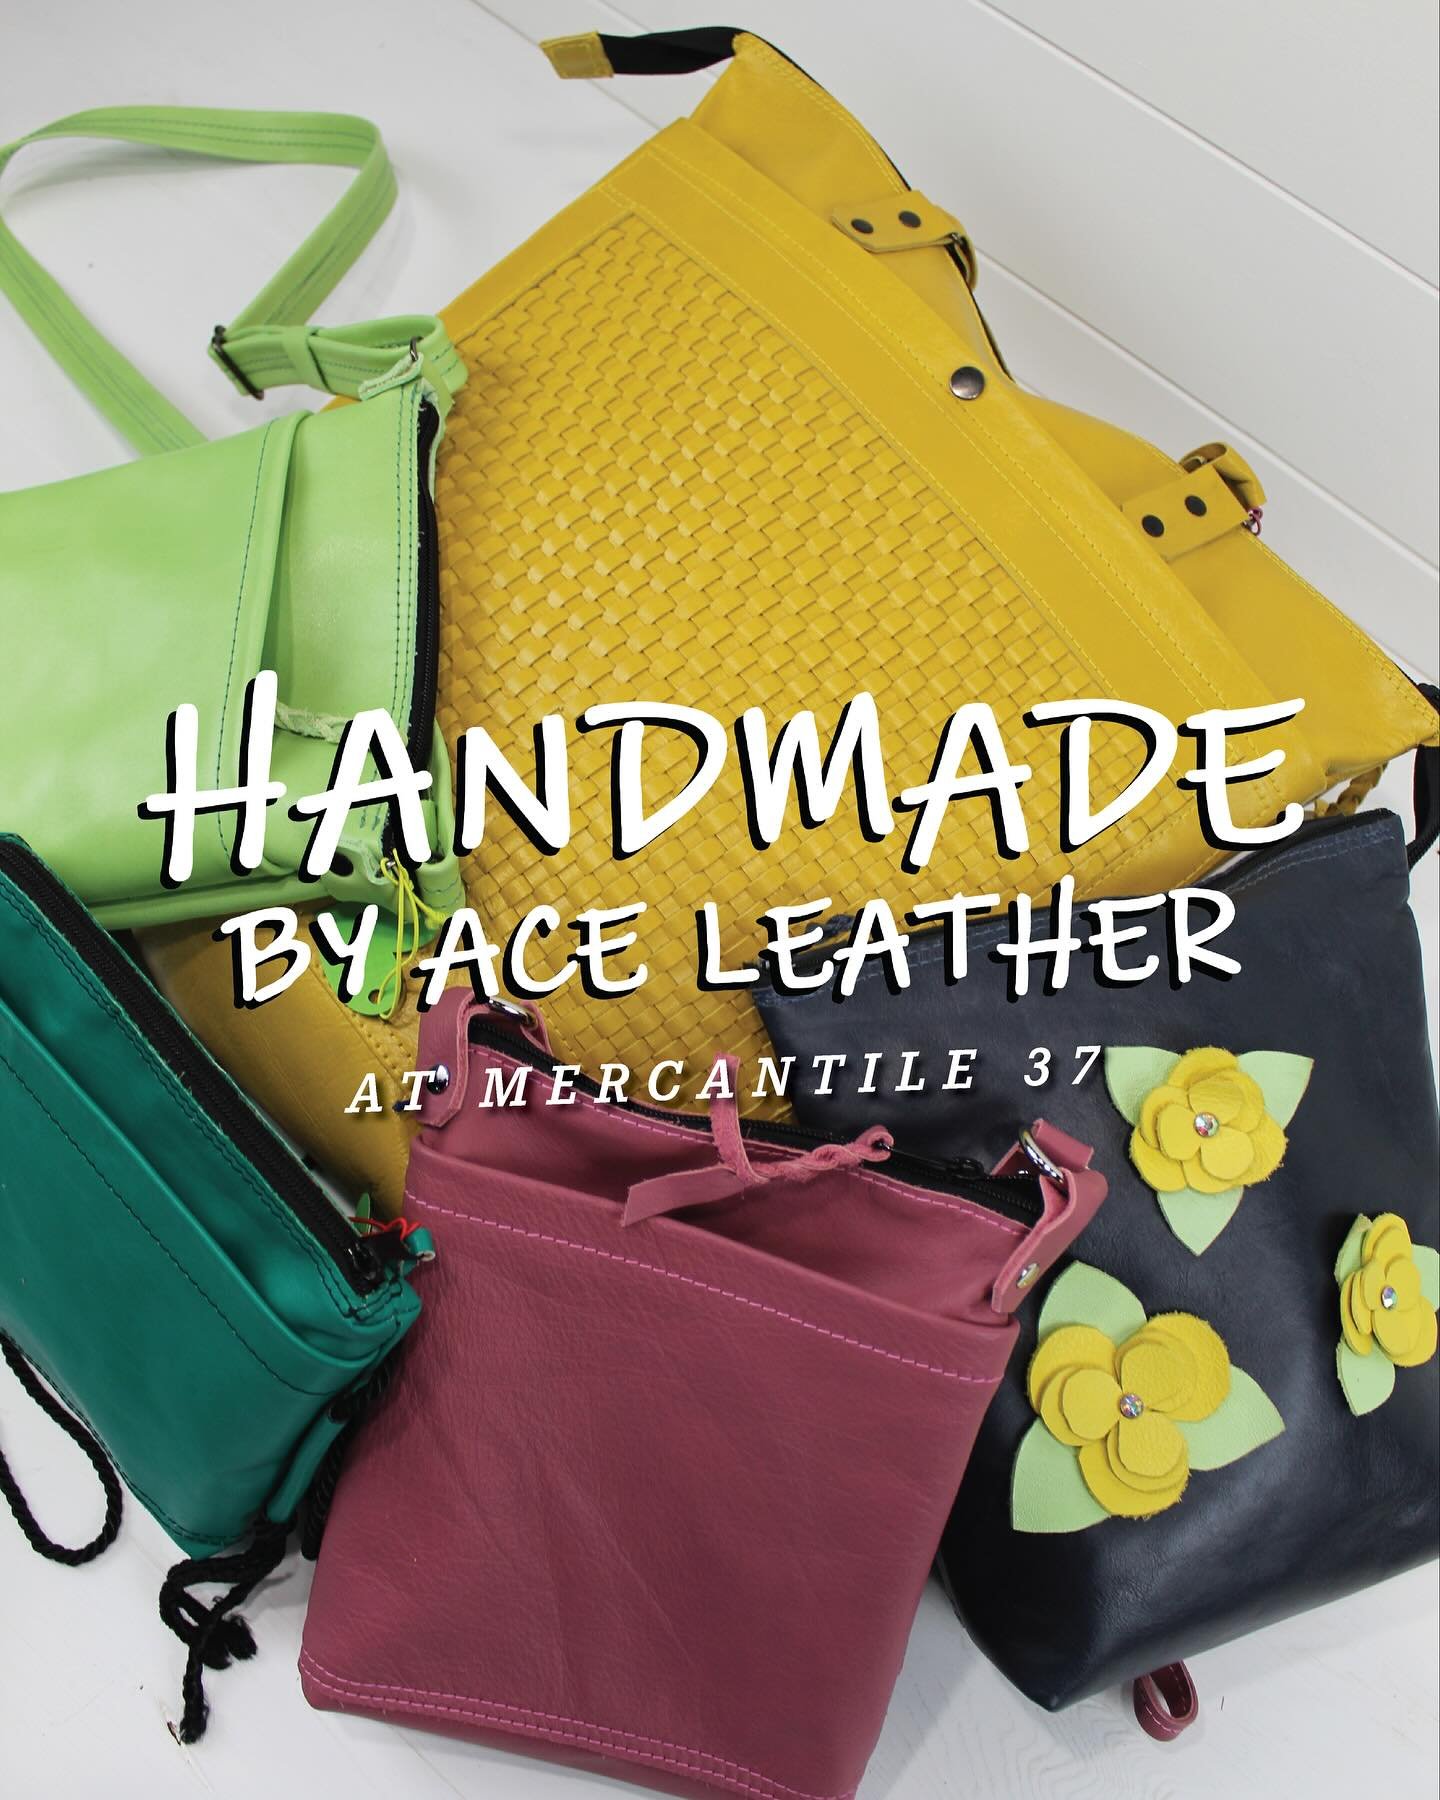 Ace Leather is the next maker joining us for MOMS &amp; MIMOSAS 🌸🥂 

Come and see these handmade leather goods. Each bag is made with the softest leather and made to last forever! 

So join us and several local makers NEXT Saturday, as we celebrate